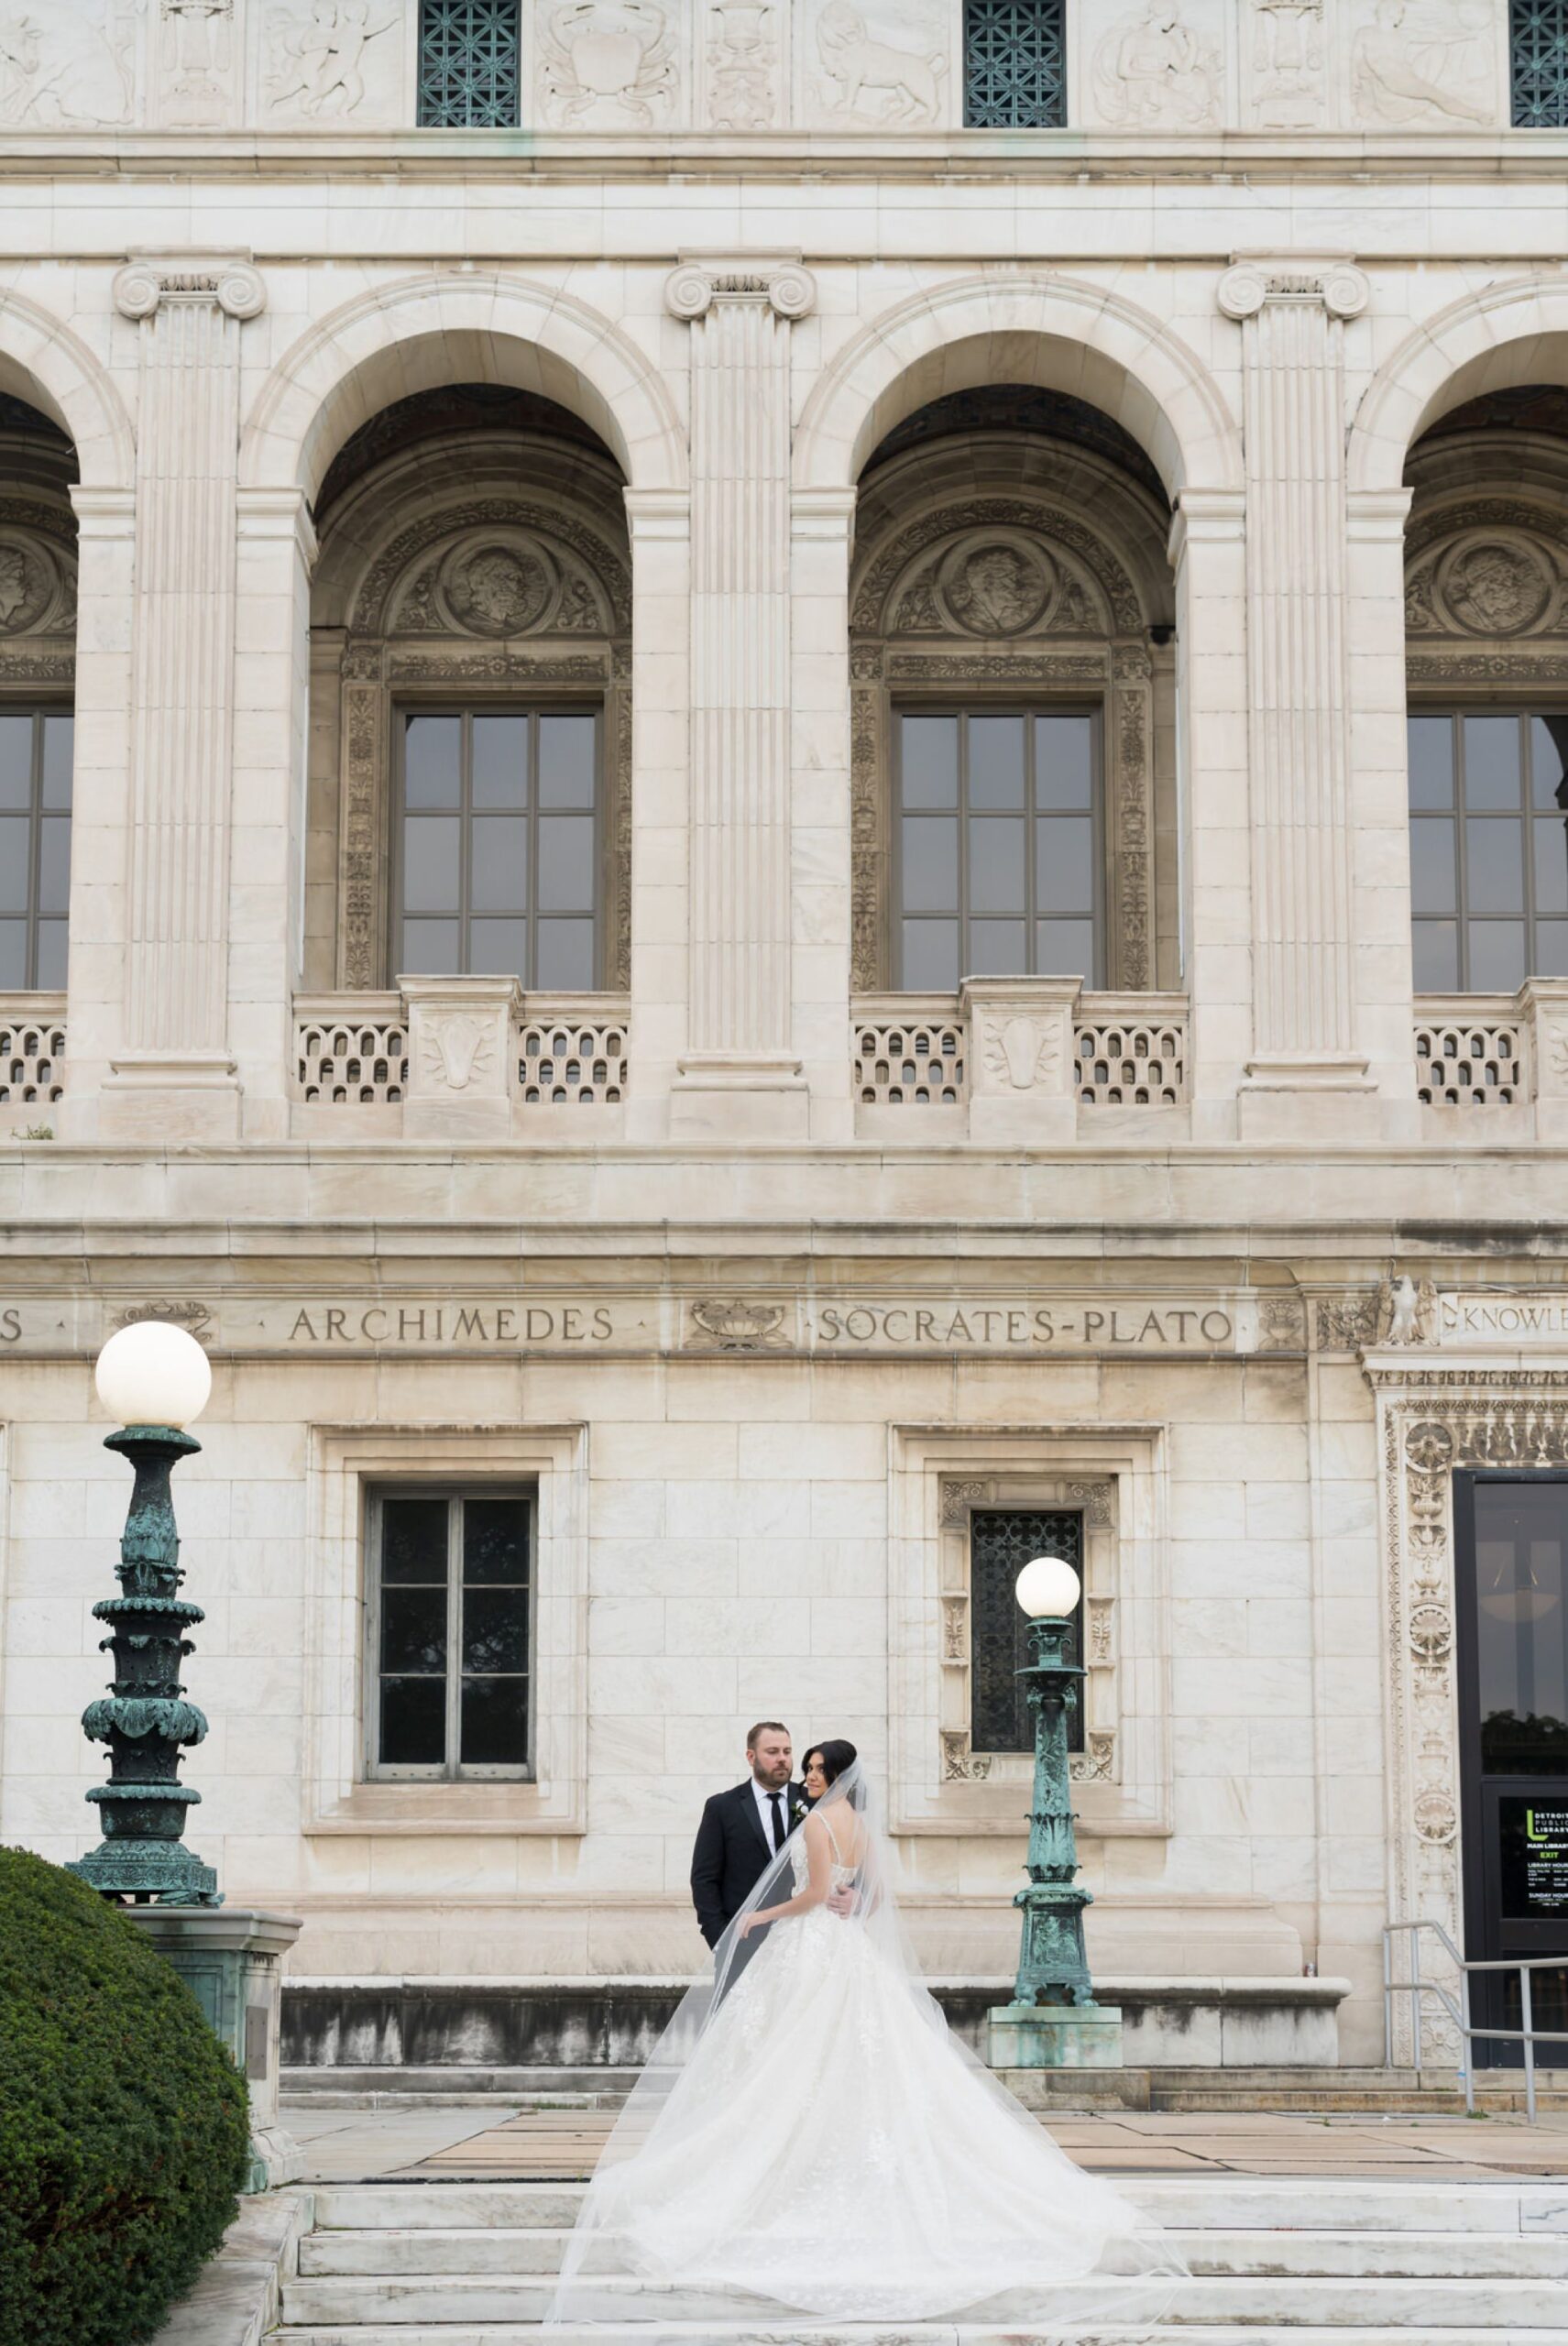 A bride and groom pose on steps of the Detroit Public Library on Woodward on their wedding day.  